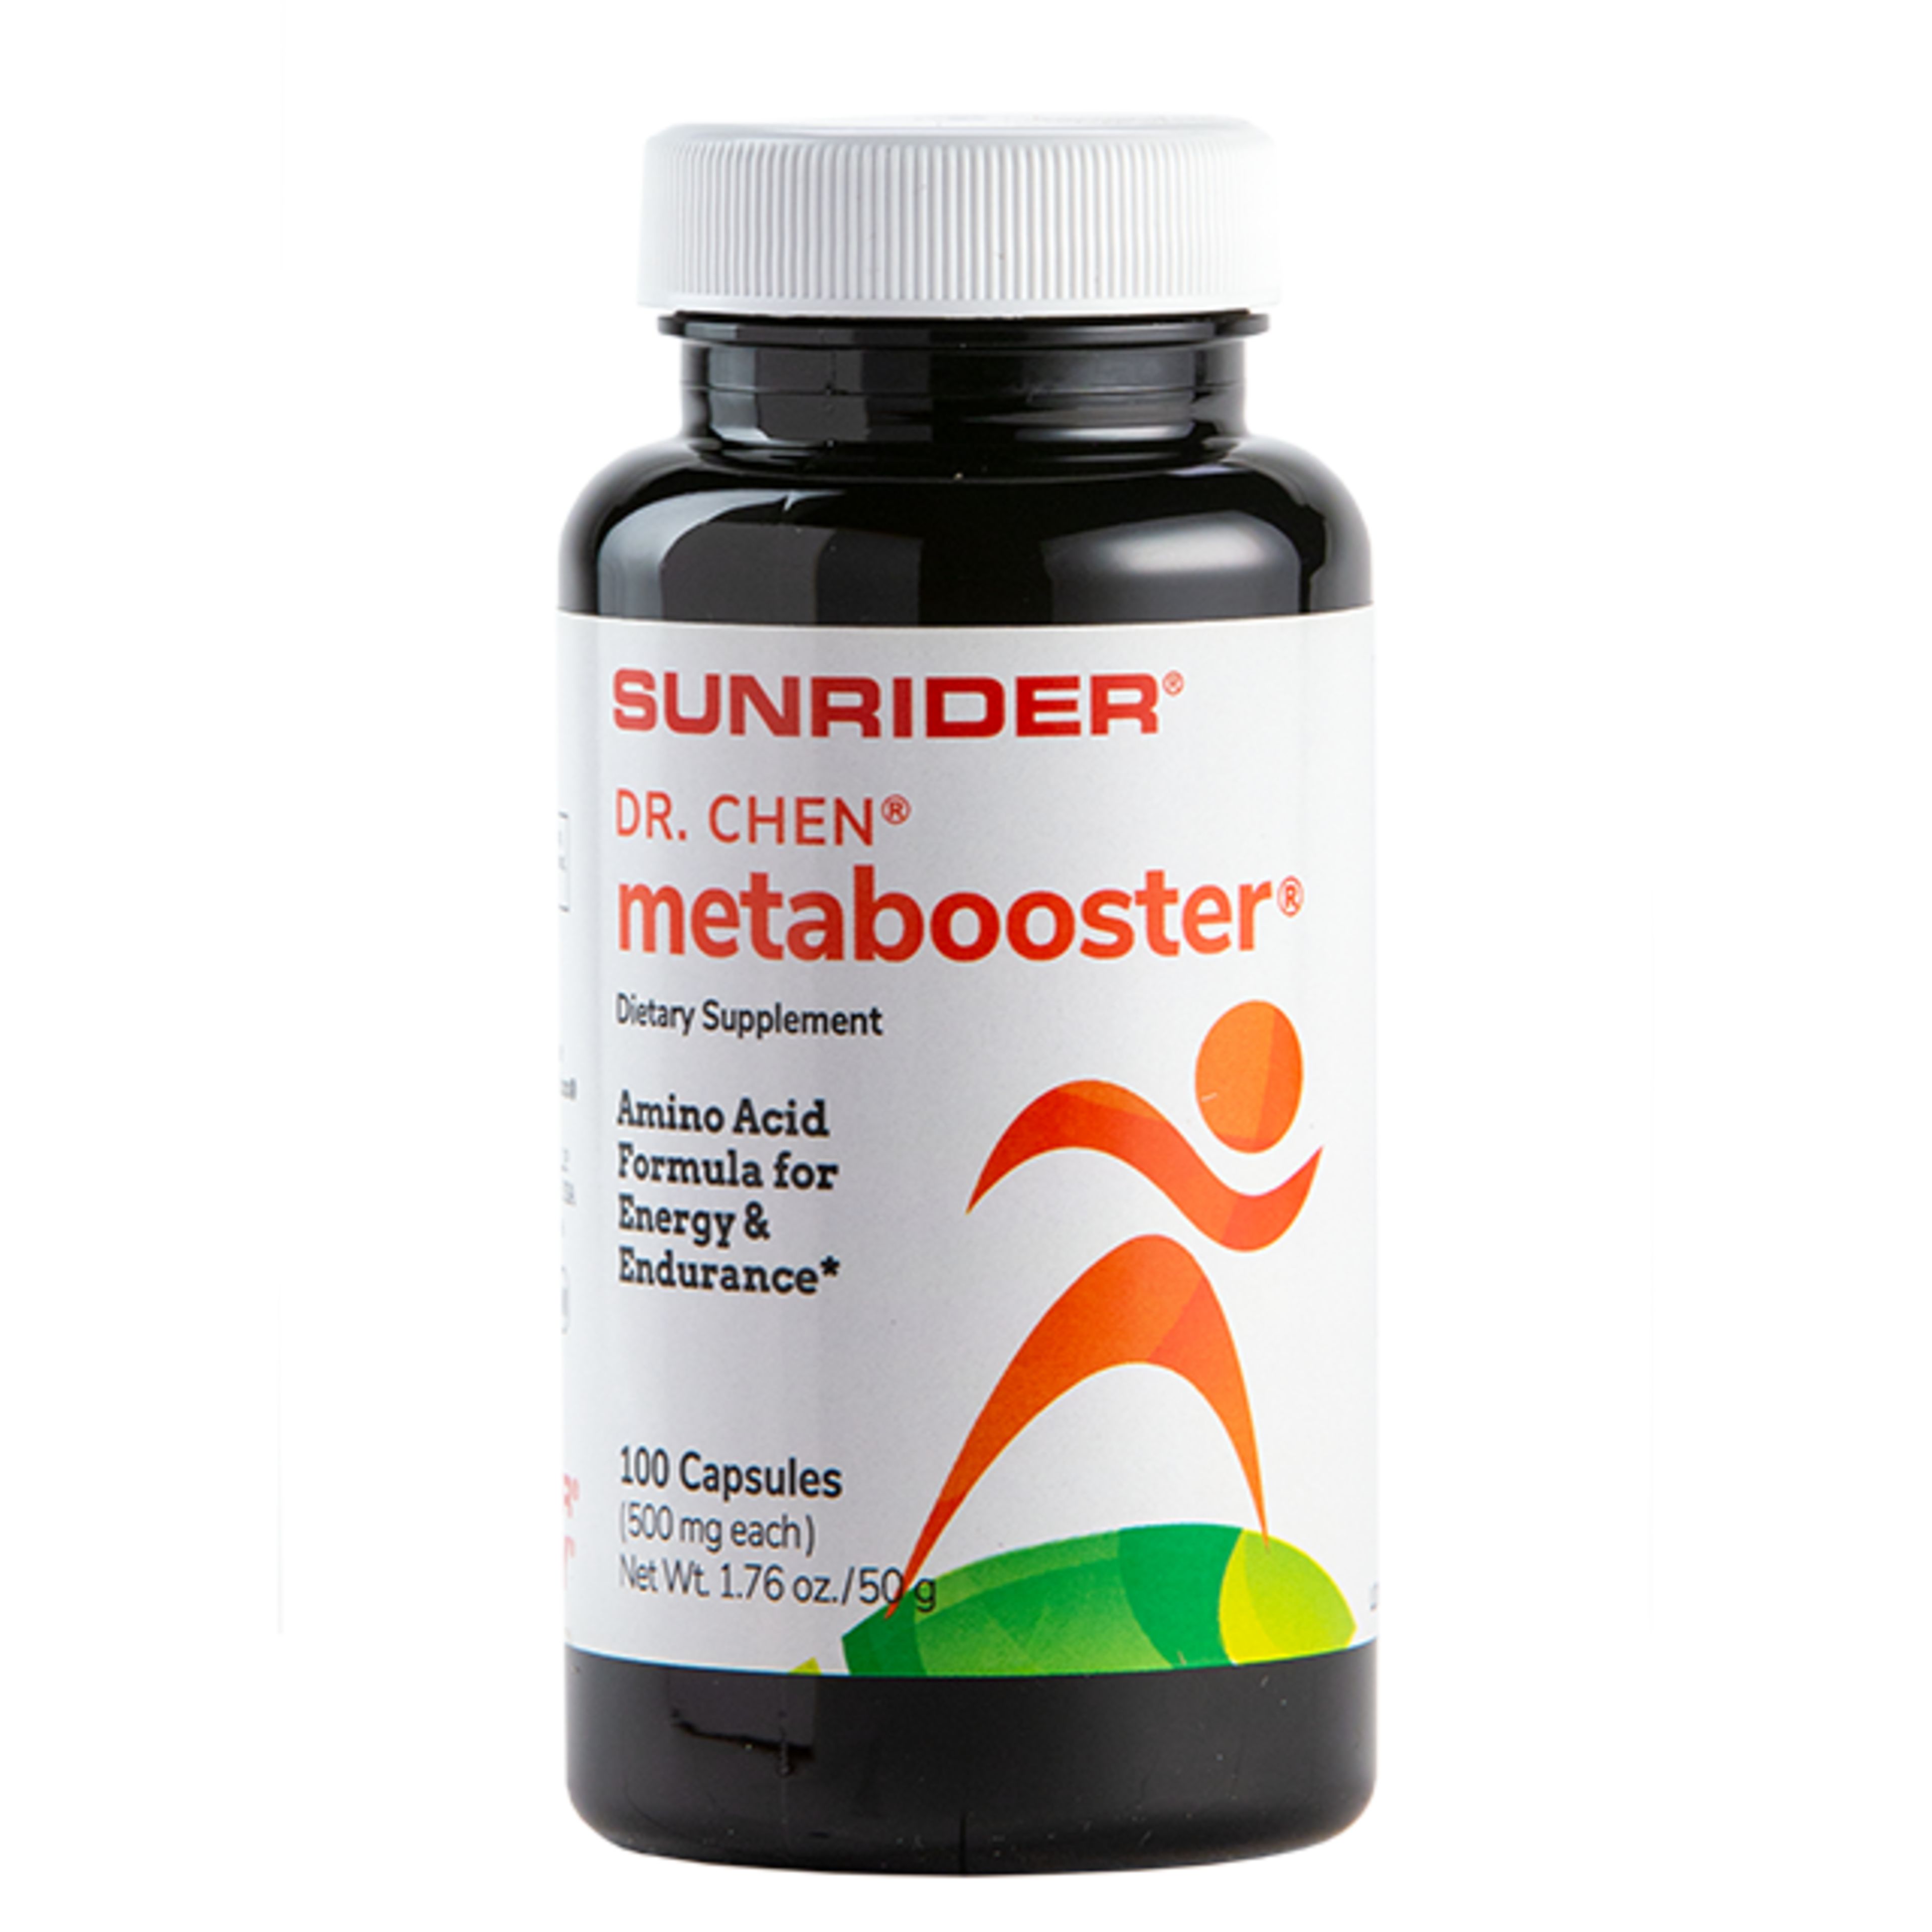 Dr. Chen® MetaBooster® 100 Capsules (500 mg each capsule)